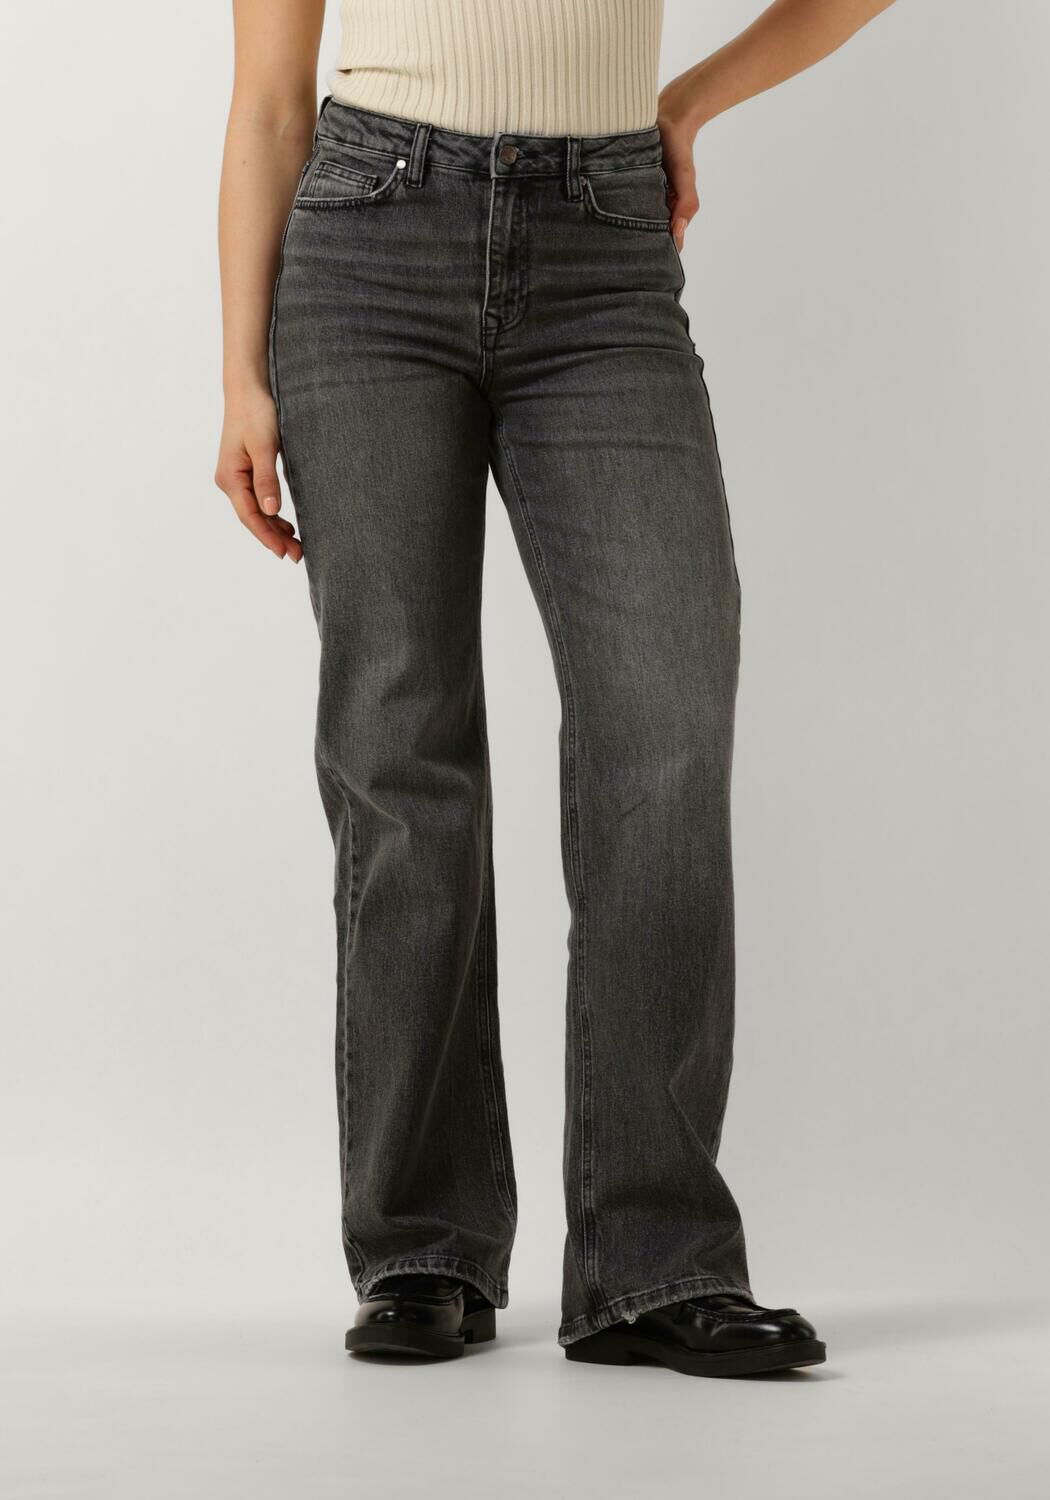 MY ESSENTIAL WARDROBE Dames Jeans 35 The Louis 139 High Wide Y Donkergrijs